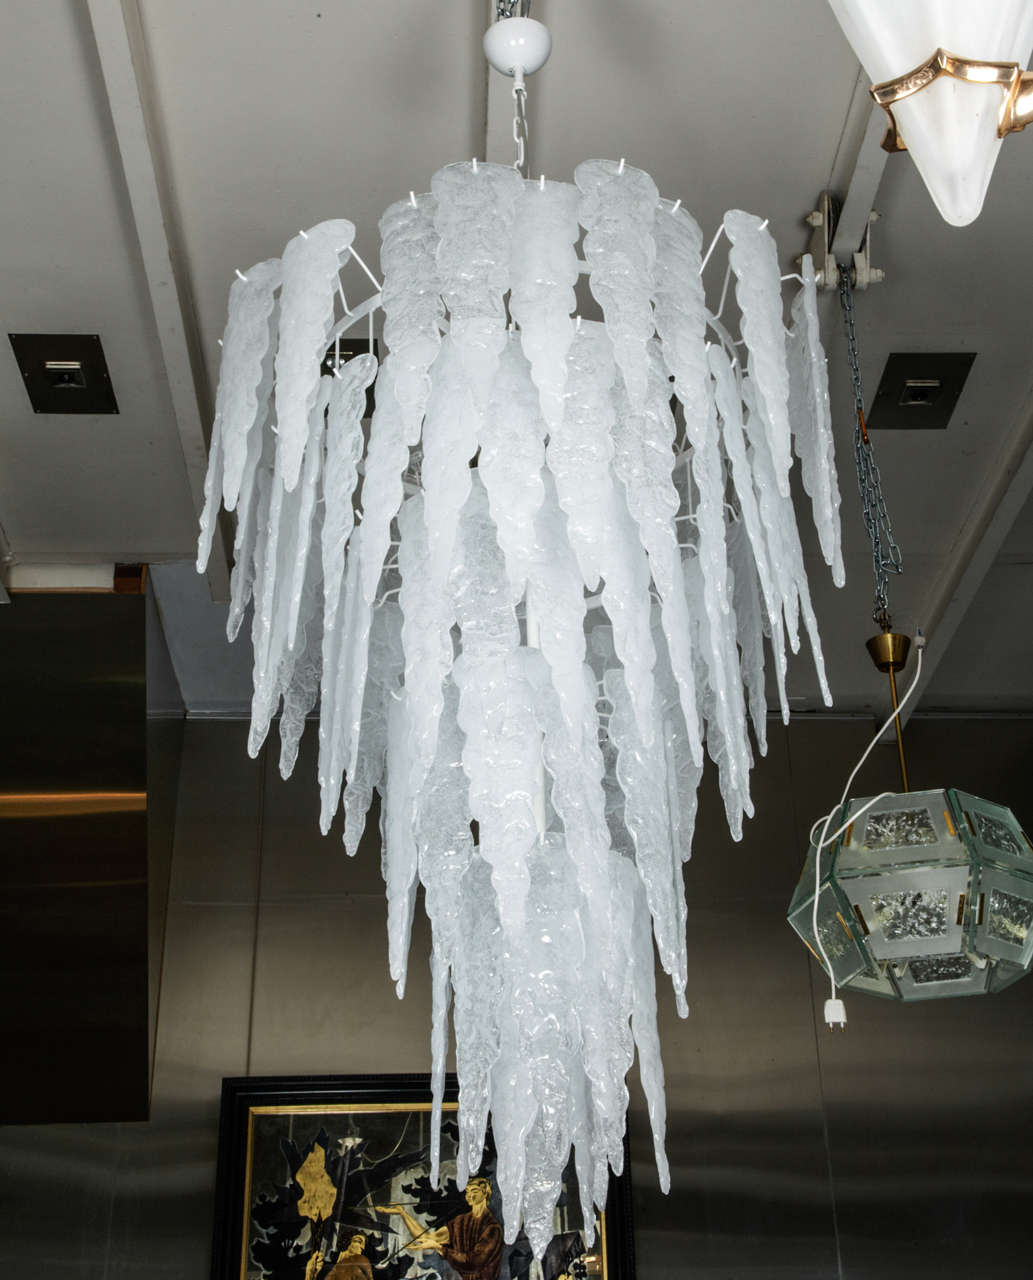 Great stalactite white snow glass chandelier.
Dimensions is provided without the chain.